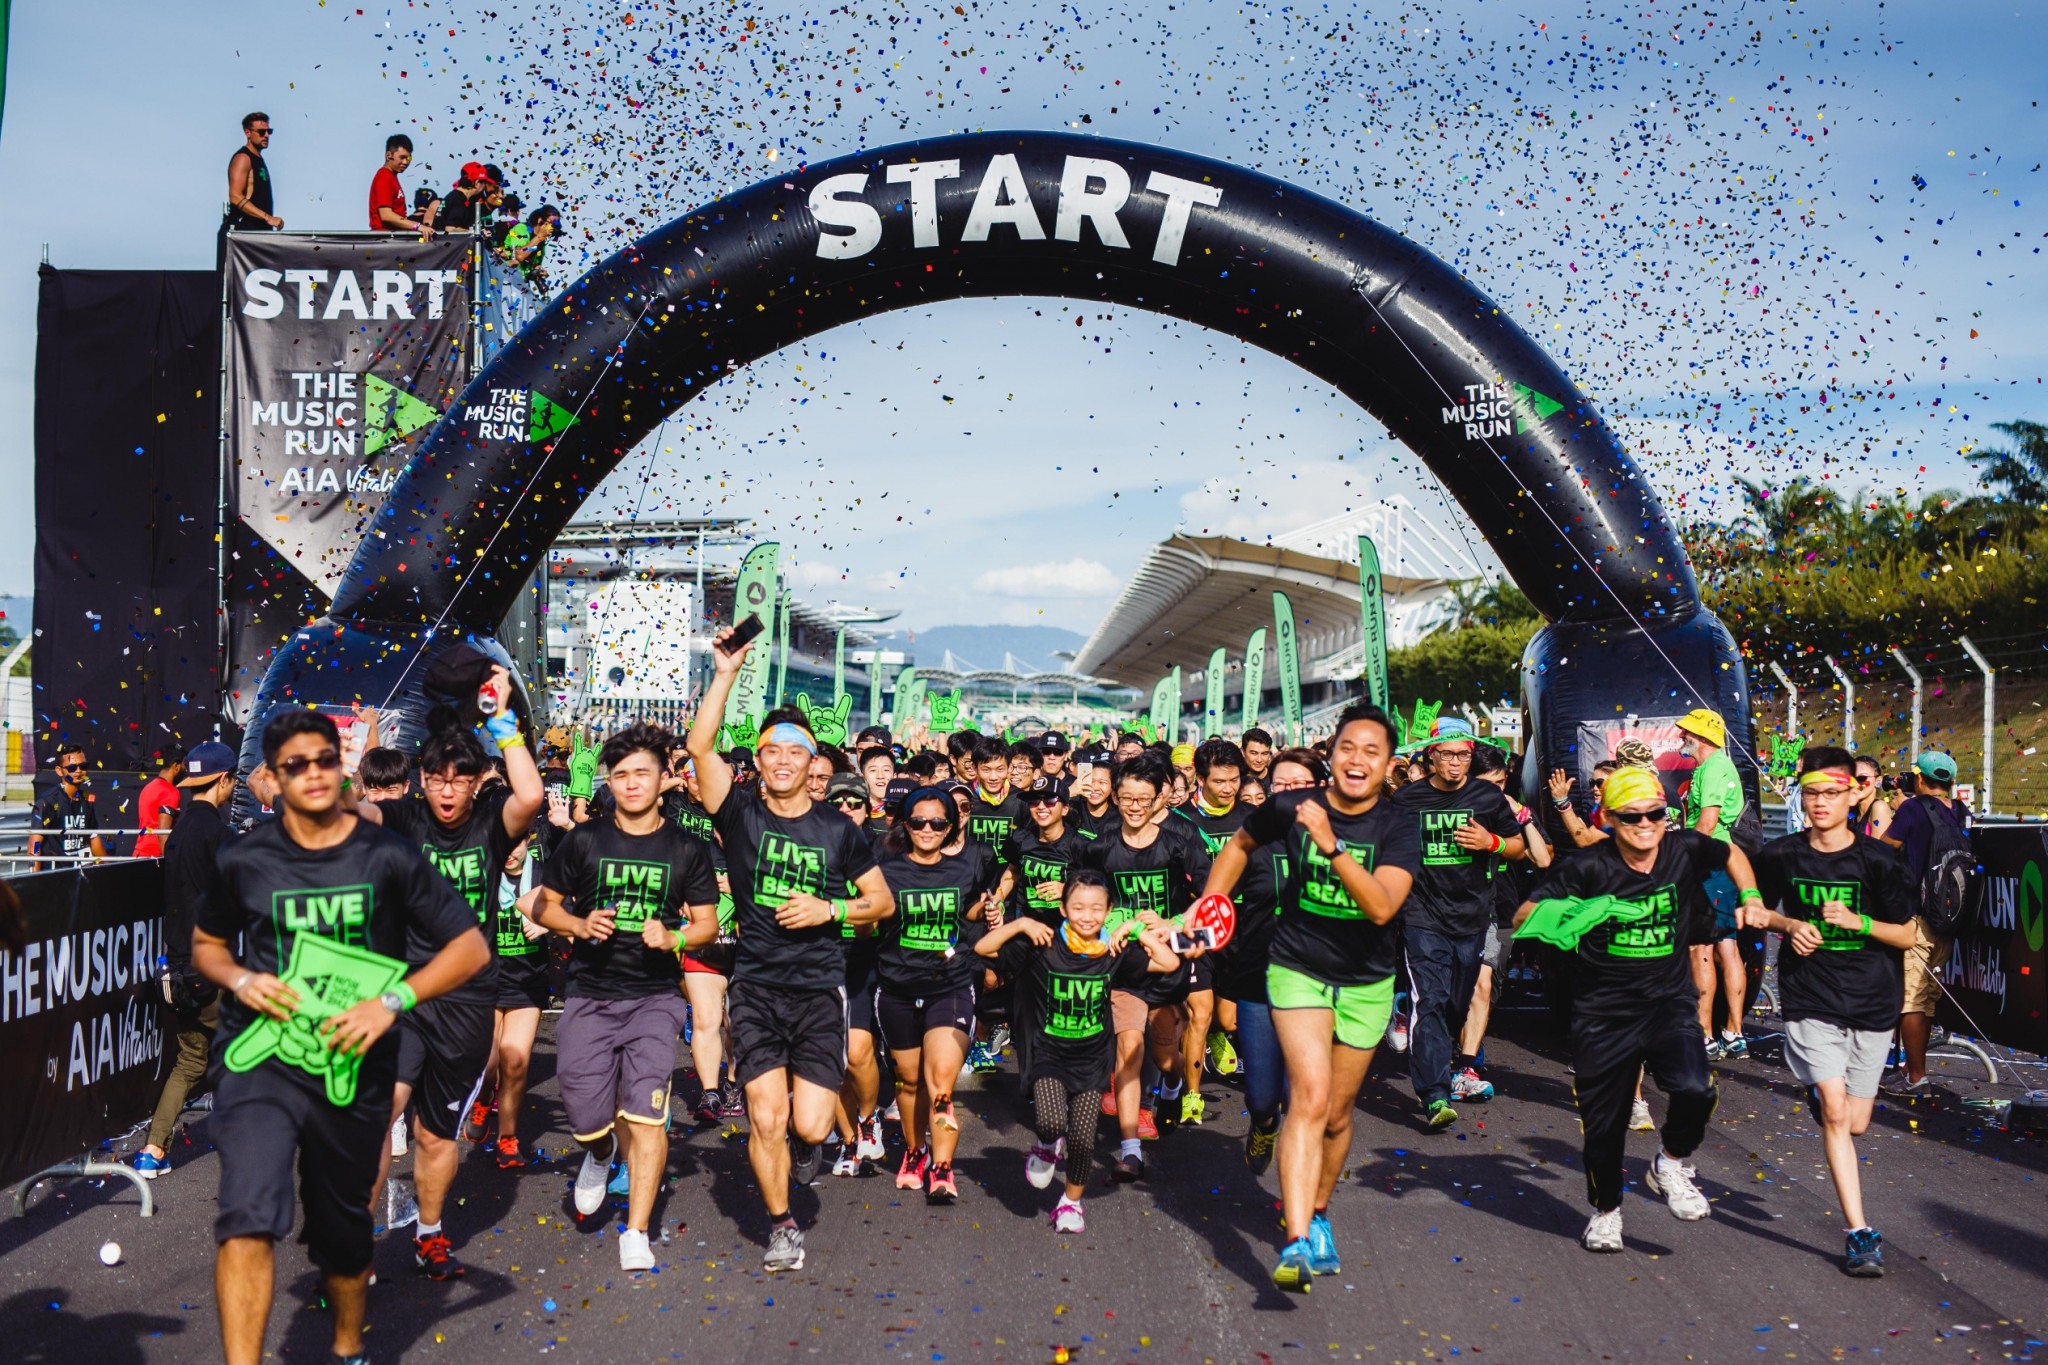 20000-enthusiastic-music-runners-flagged-off-at-the-sepang-international-circuit